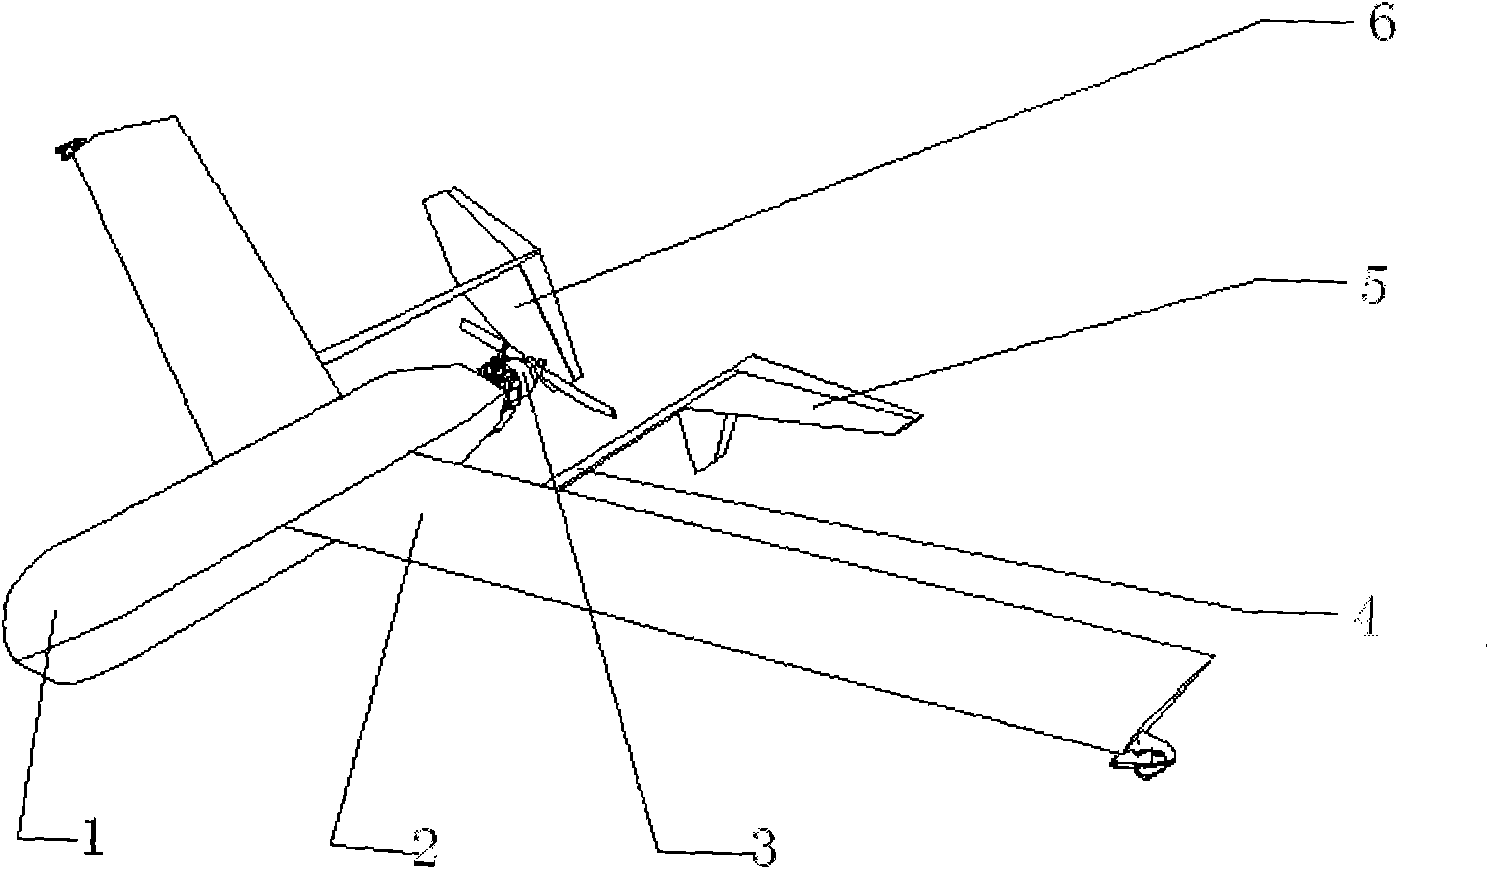 Small UAV aerodynamic layout for vertical rope-type recovery